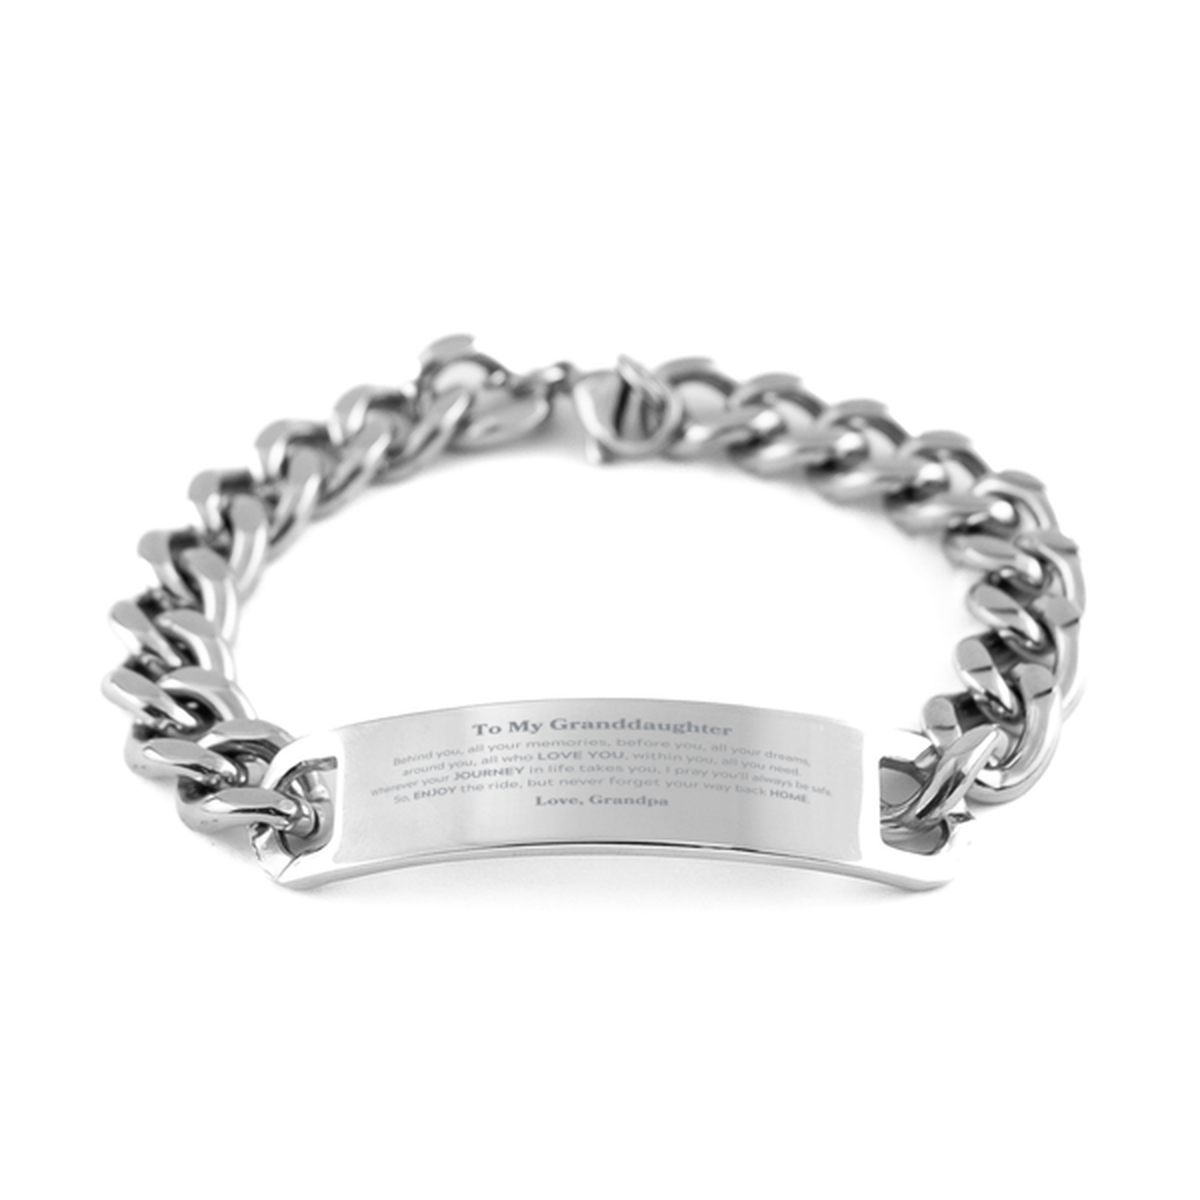 To My Granddaughter Graduation Gifts from Grandpa, Granddaughter Cuban Chain Stainless Steel Bracelet Christmas Birthday Gifts for Granddaughter Behind you, all your memories, before you, all your dreams. Love, Grandpa